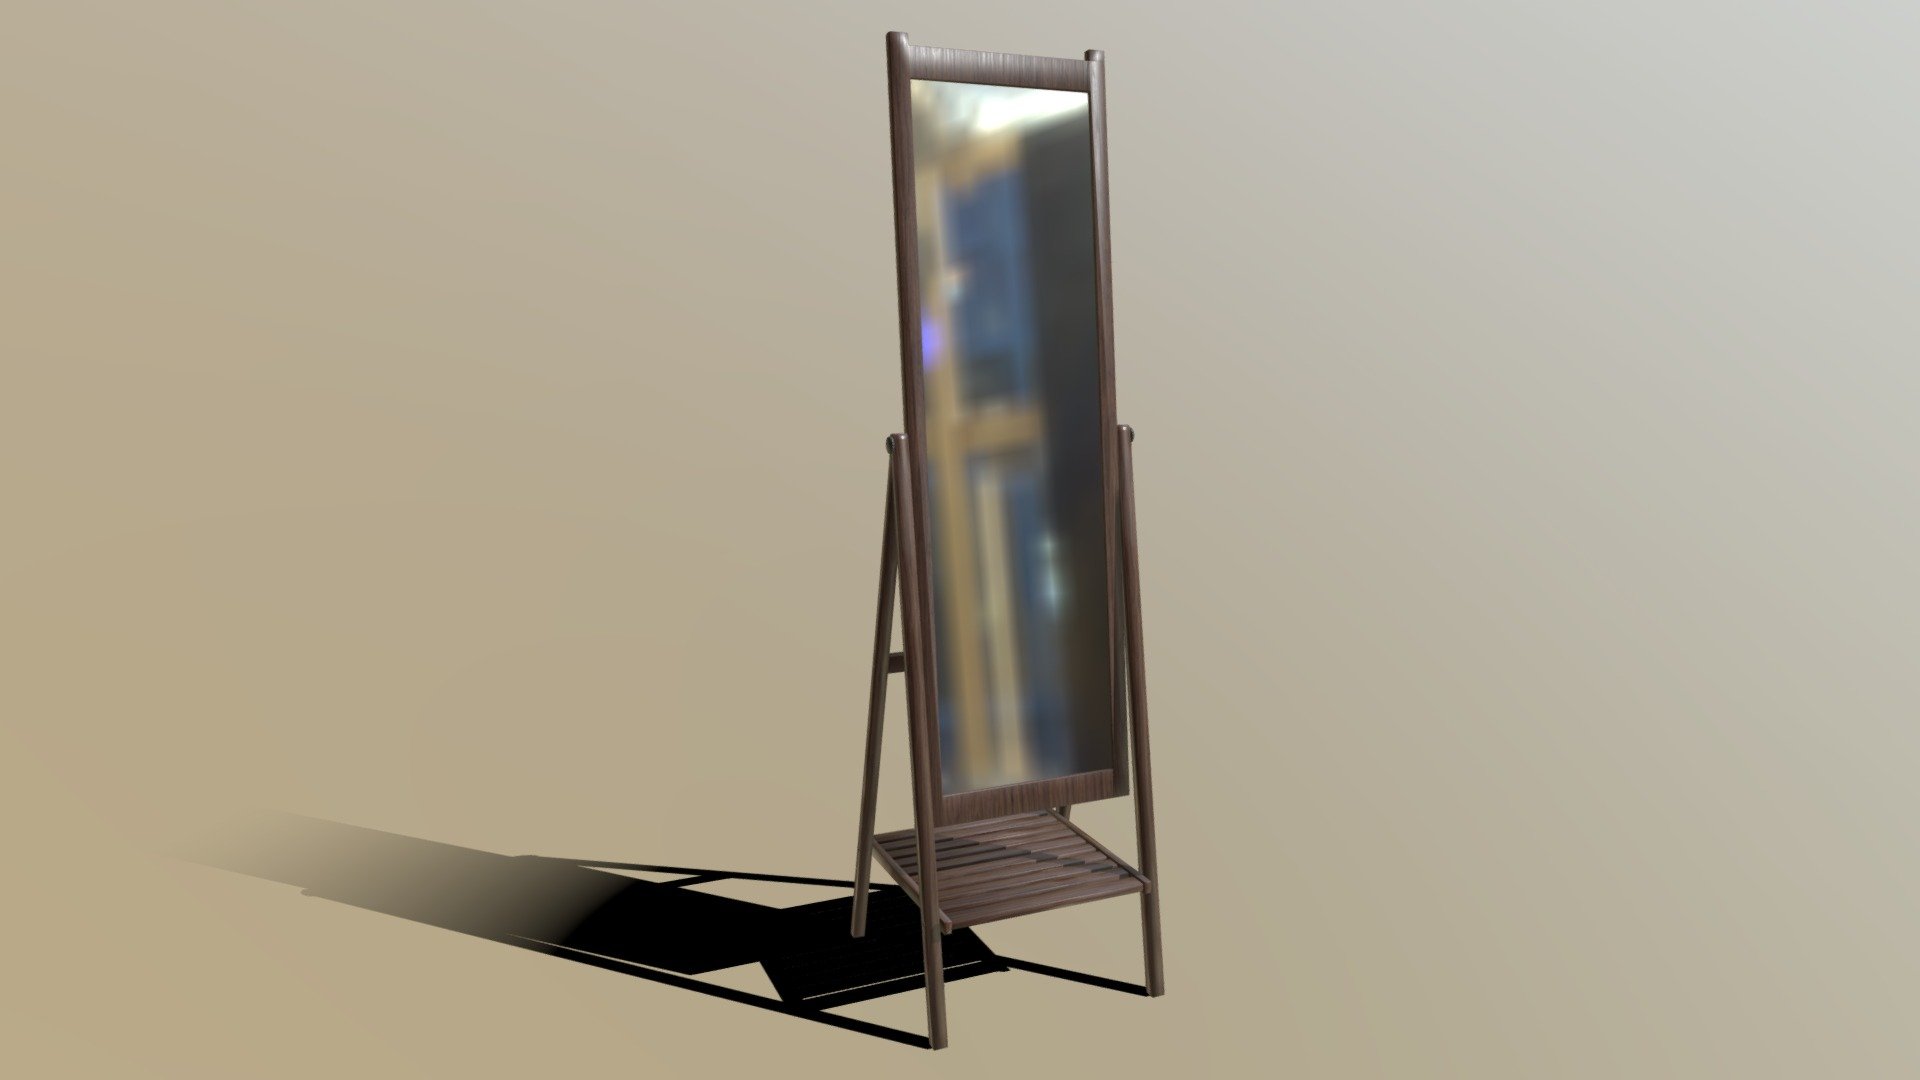 Super LOWPOLY 3D Antique Mirror for Gamification &amp; Architecture Visualization for VR / AR projects. (UVW, Texture and NormalMap).

Modelling &amp; UVW unwrapped in 3DS Max, Textured in Substance Painter 3d model